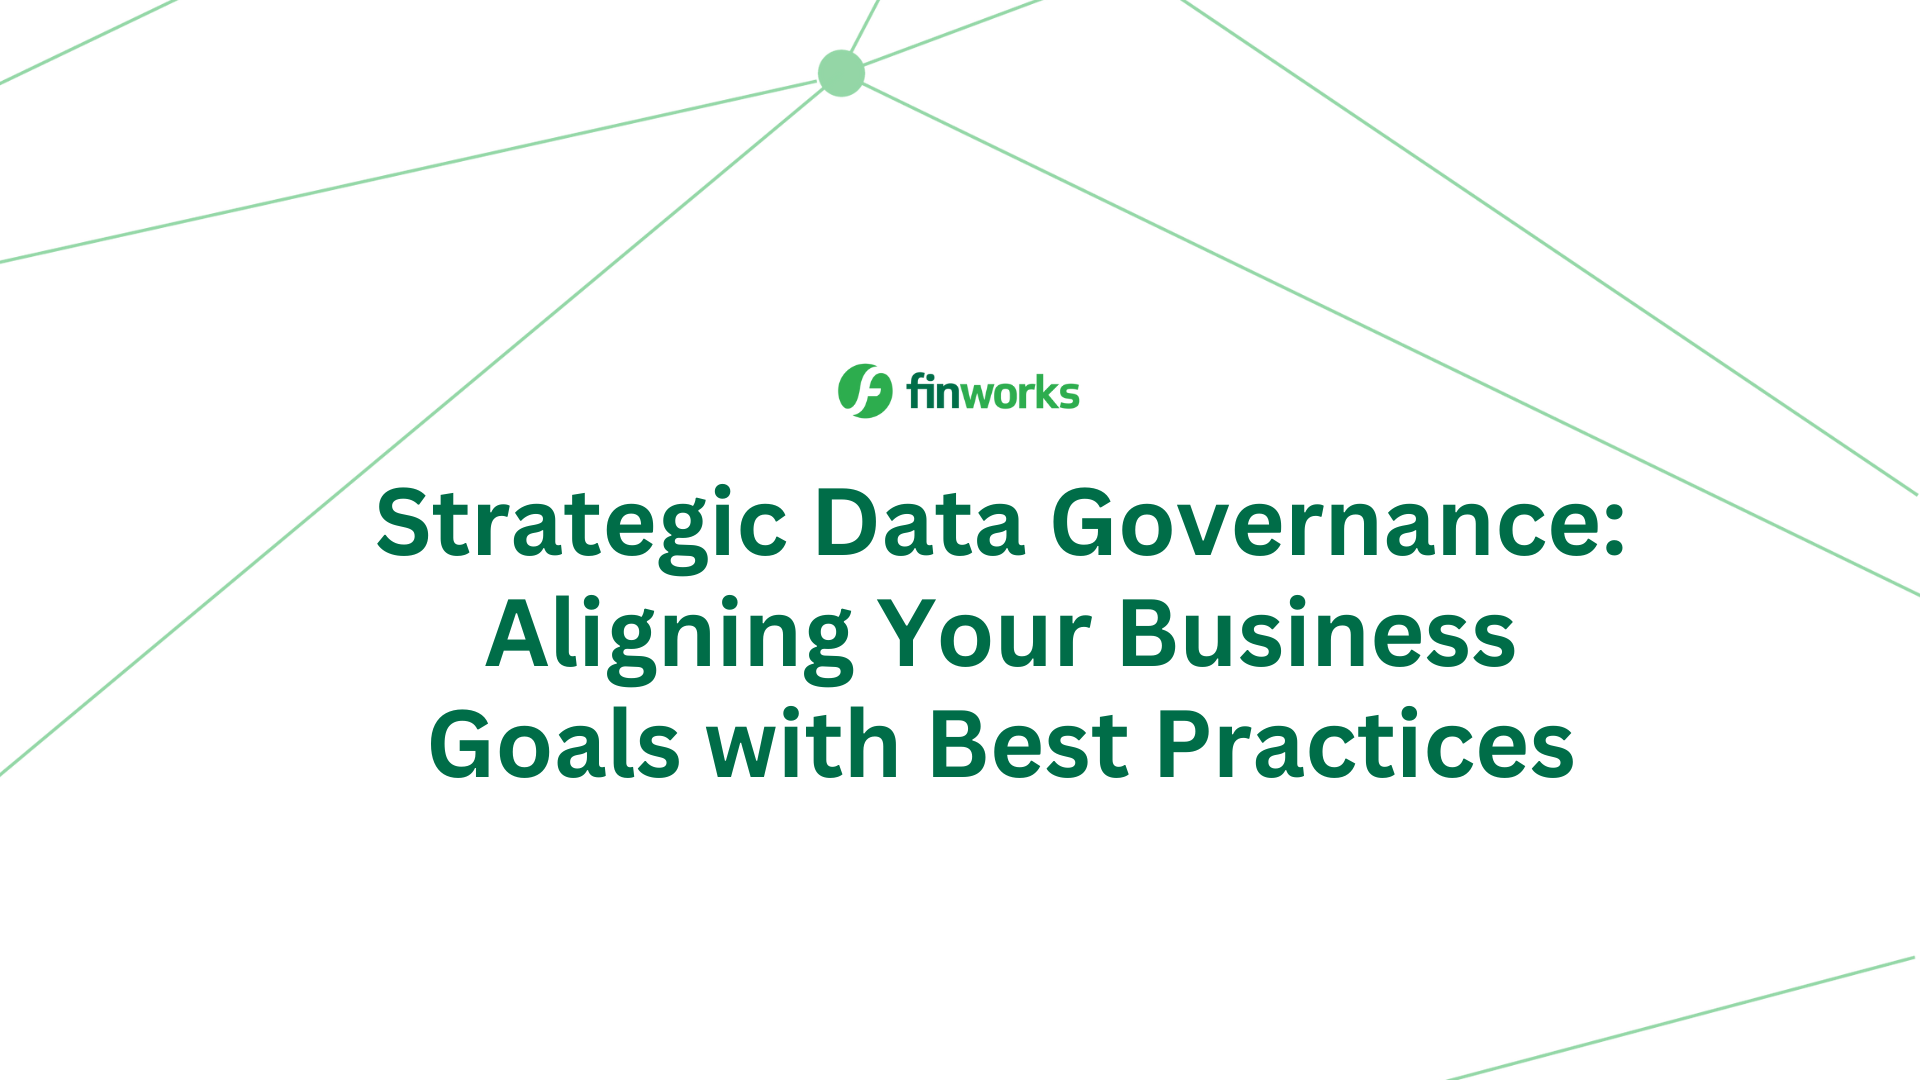 Strategic Data Governance: Aligning Your Business Goals with Best Practices  